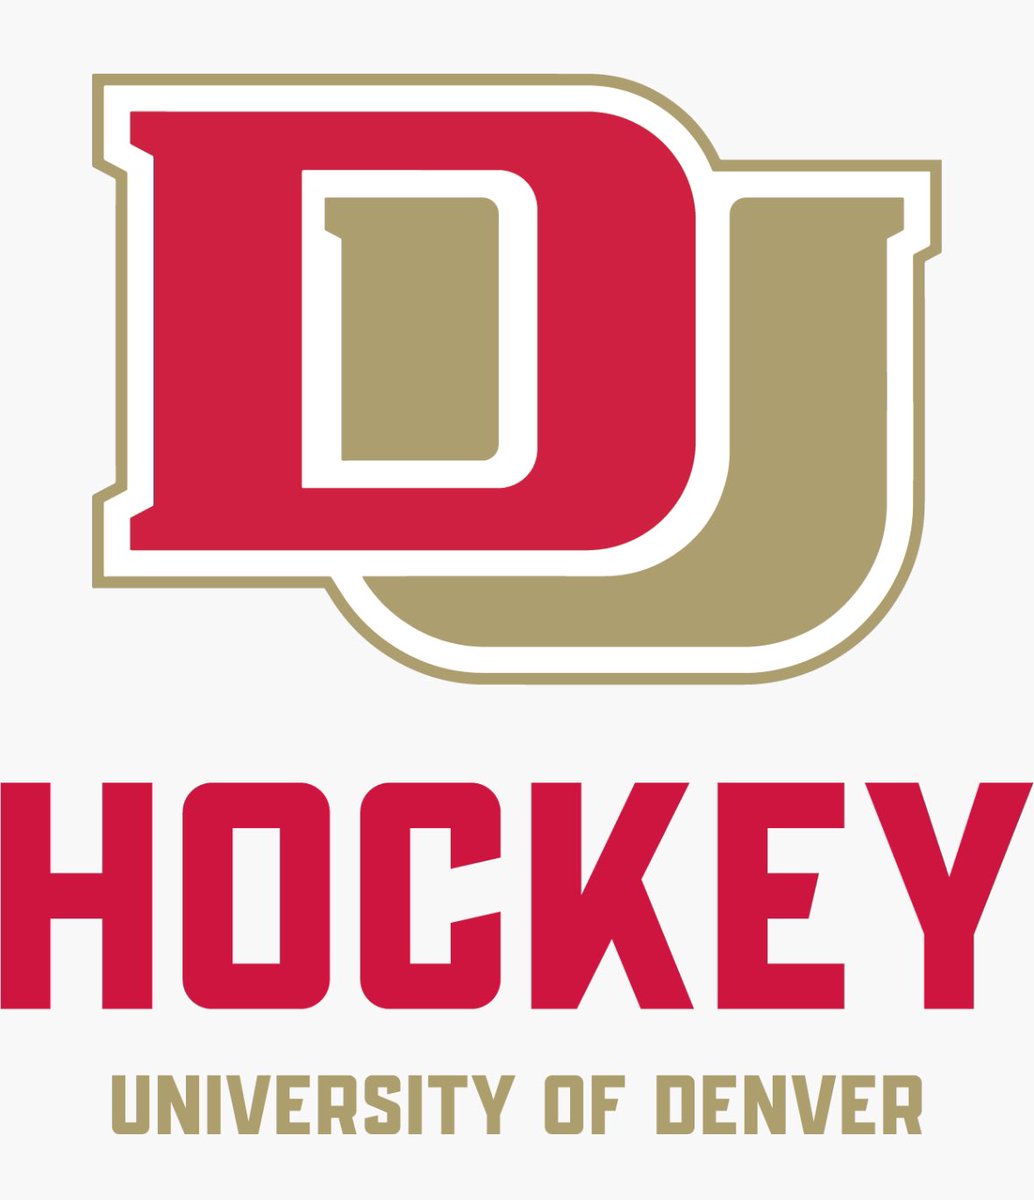 The @Edinabands Pep Band is looking forward to being the honorary Pep Band at the #FrozenFour this weekend for @DU_Hockey #GoPios #Hornets